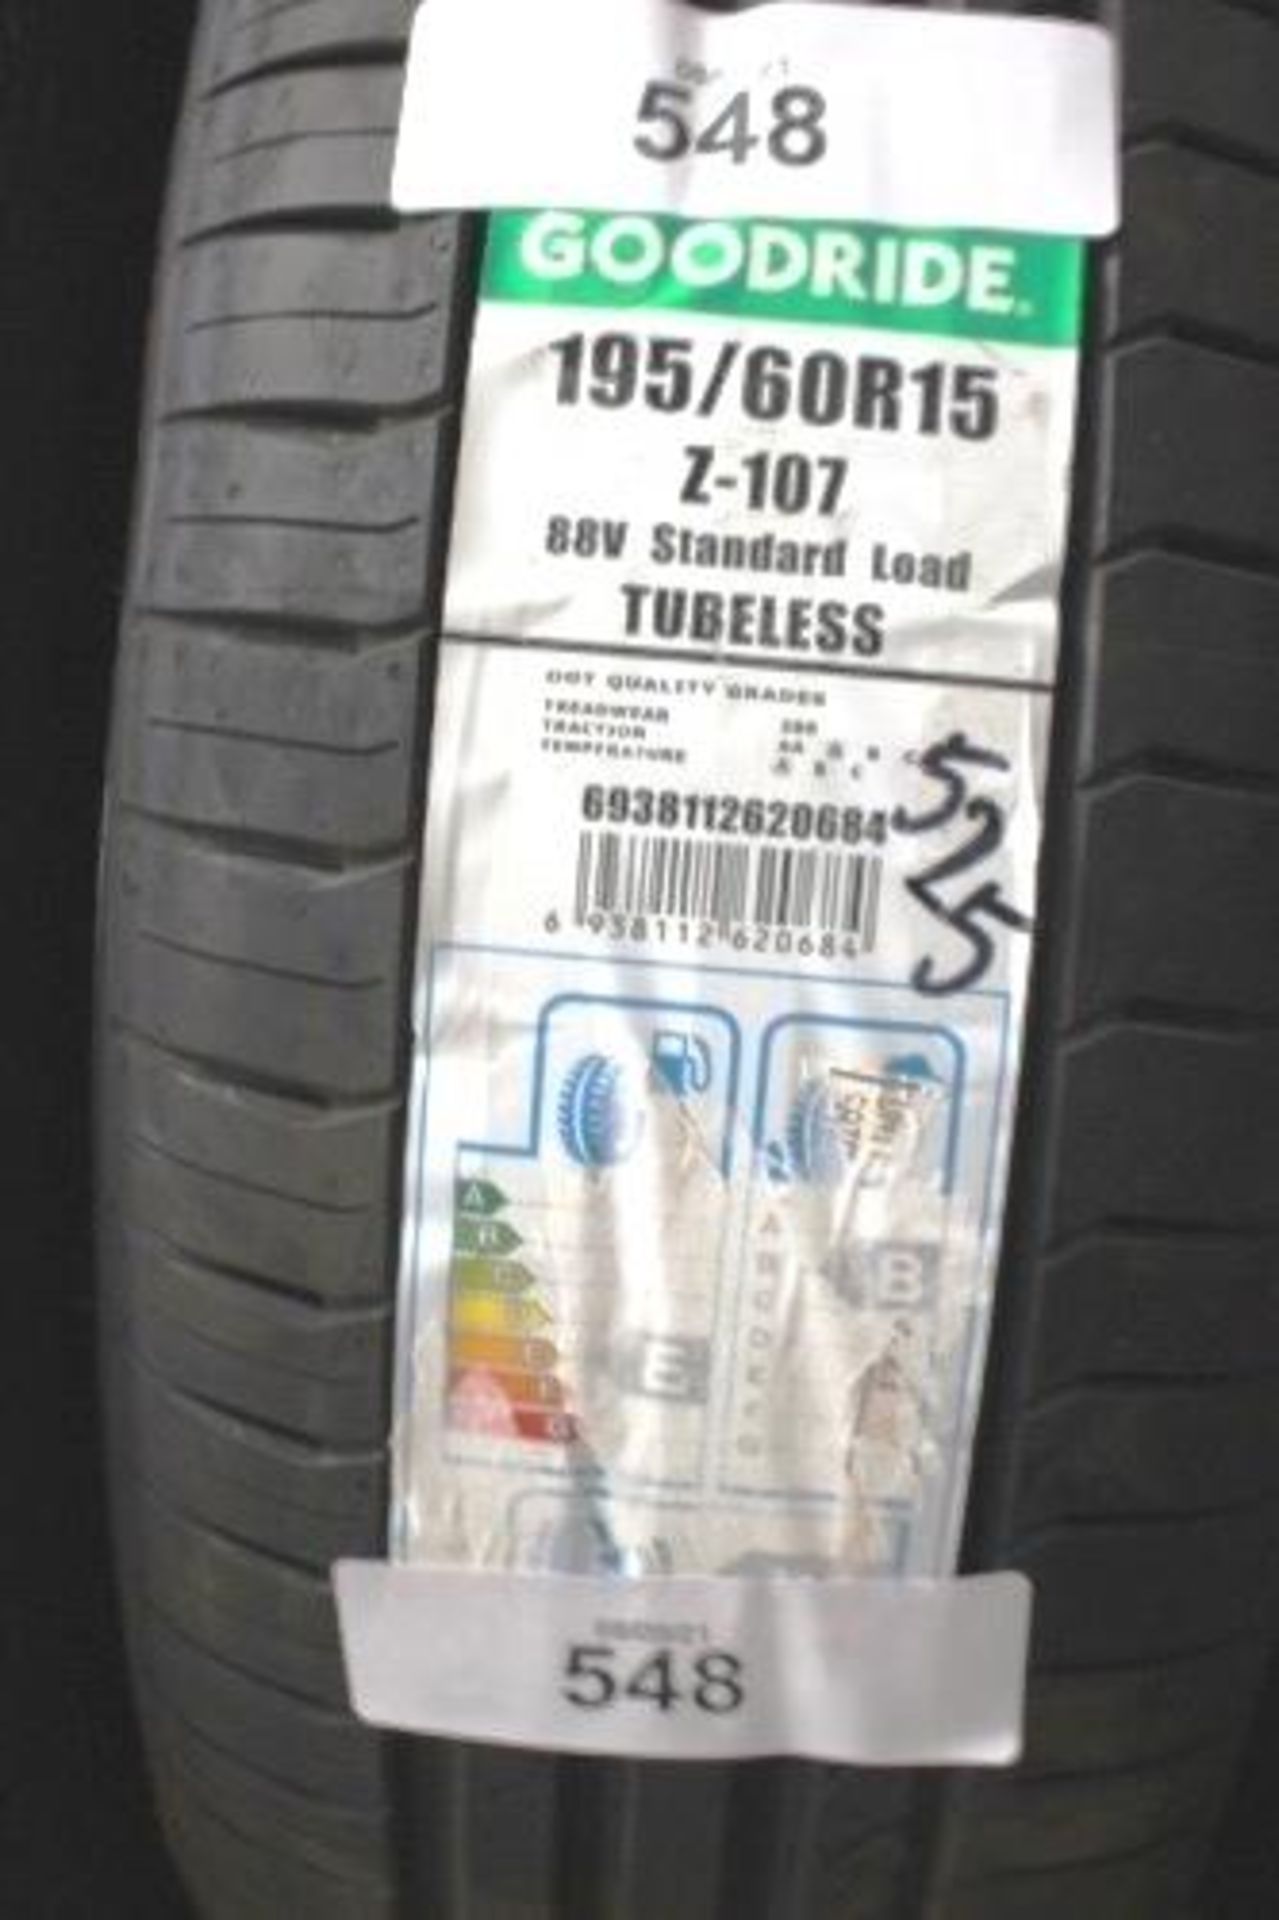 1 x Good Ride tyre, 195/60 R15 - New (top shed)